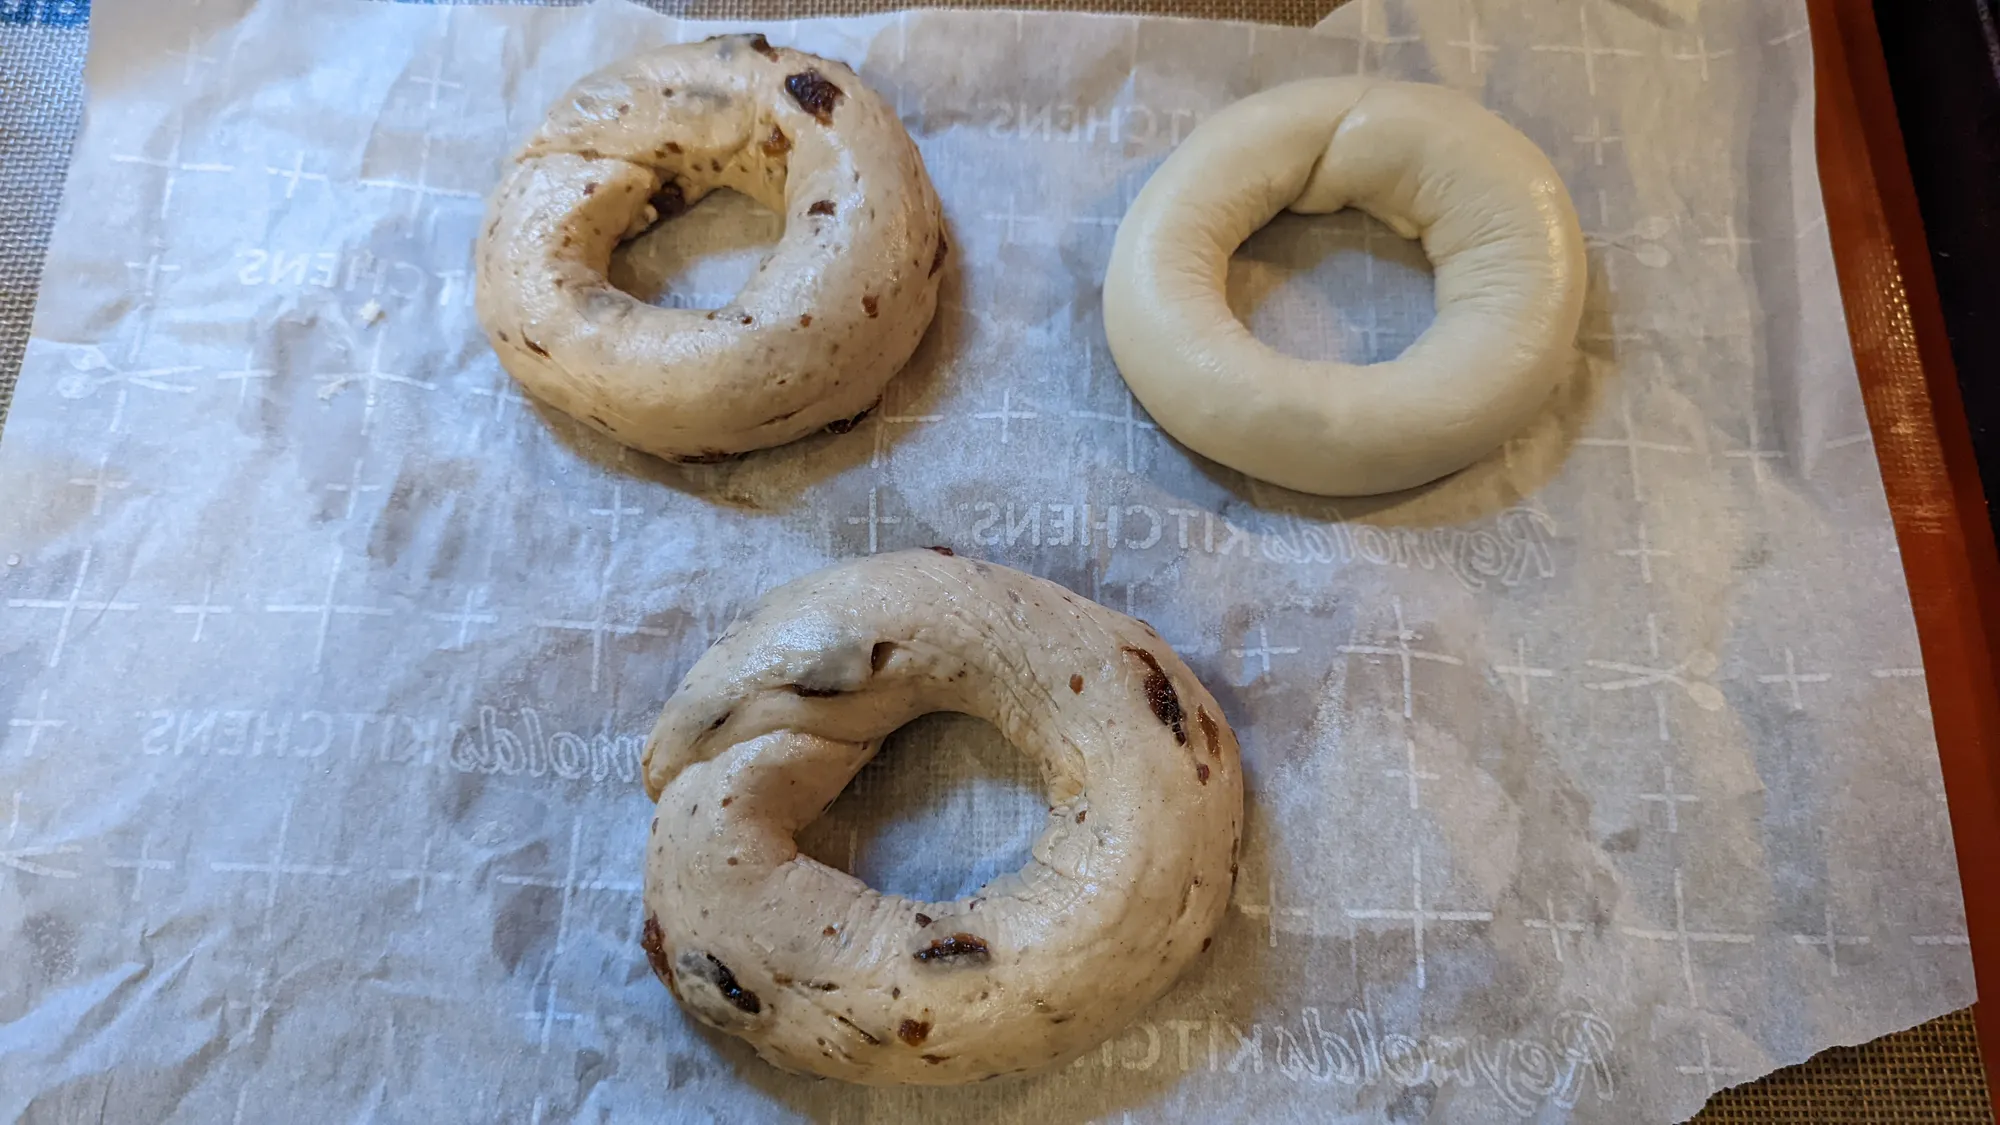 Two cinnamon-raisin and one plain bagel, shaped but not yet baked.